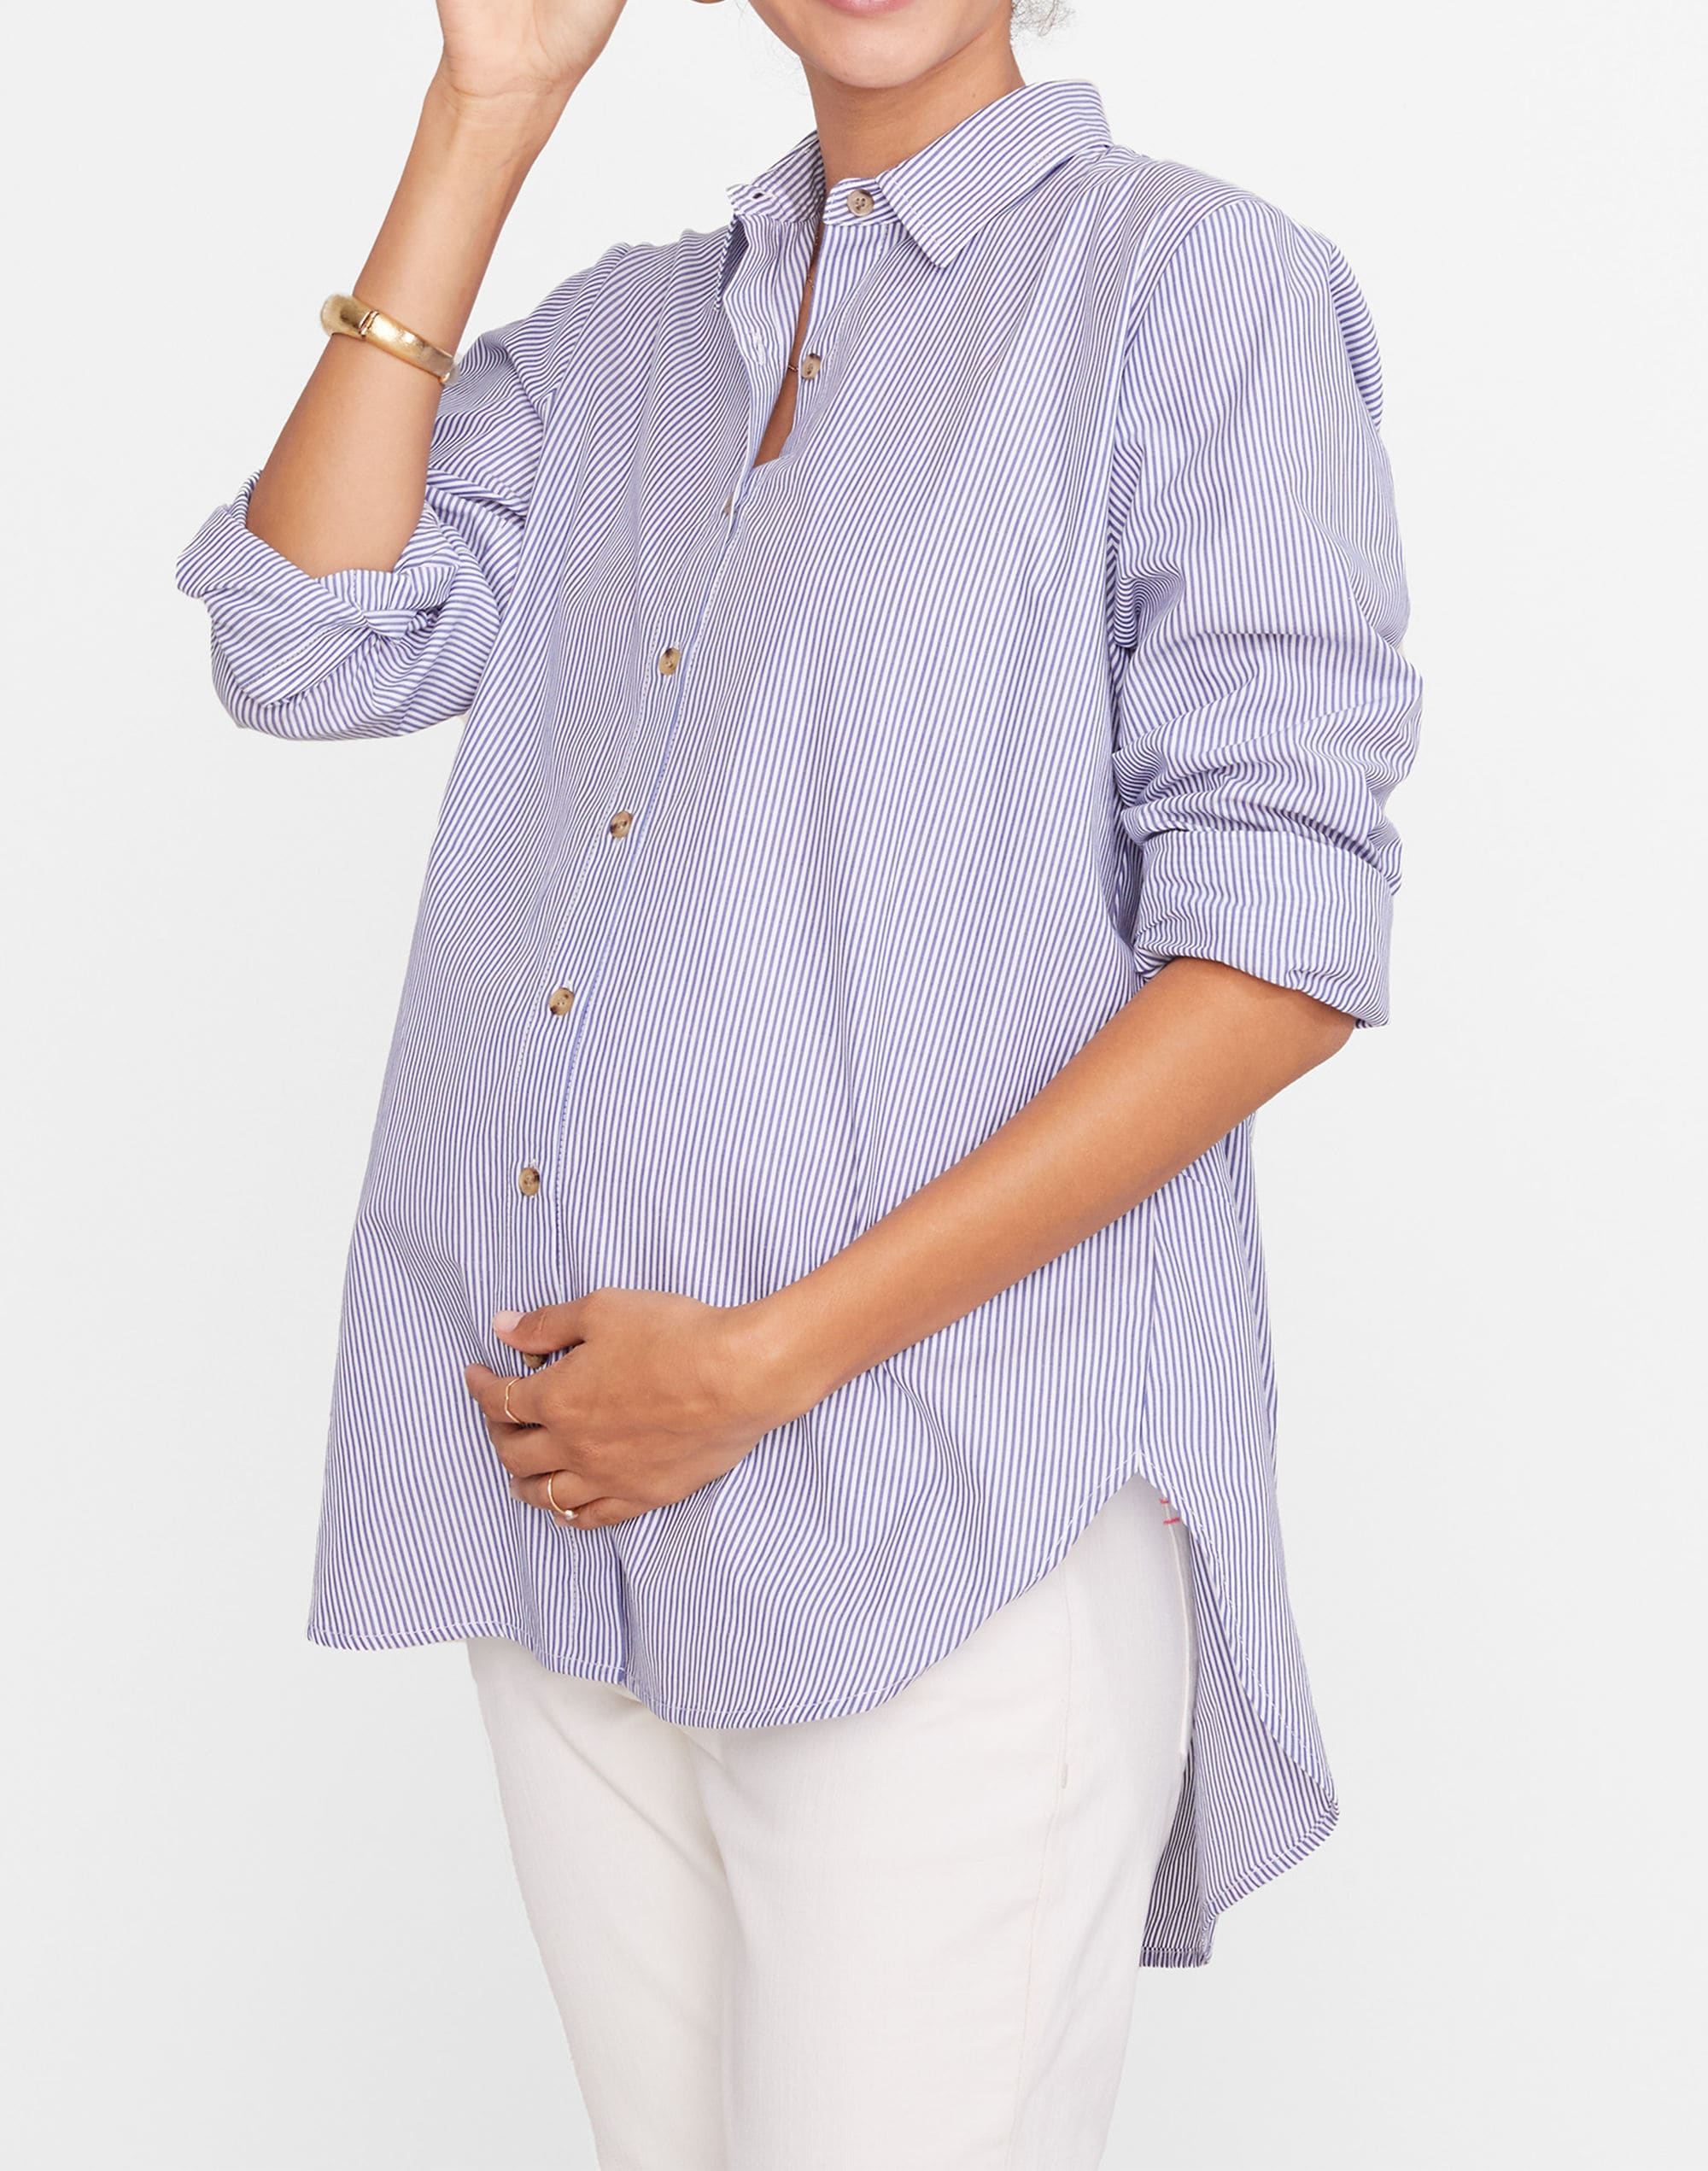 HATCH Collection® Maternity Classic Button-Down Shirt